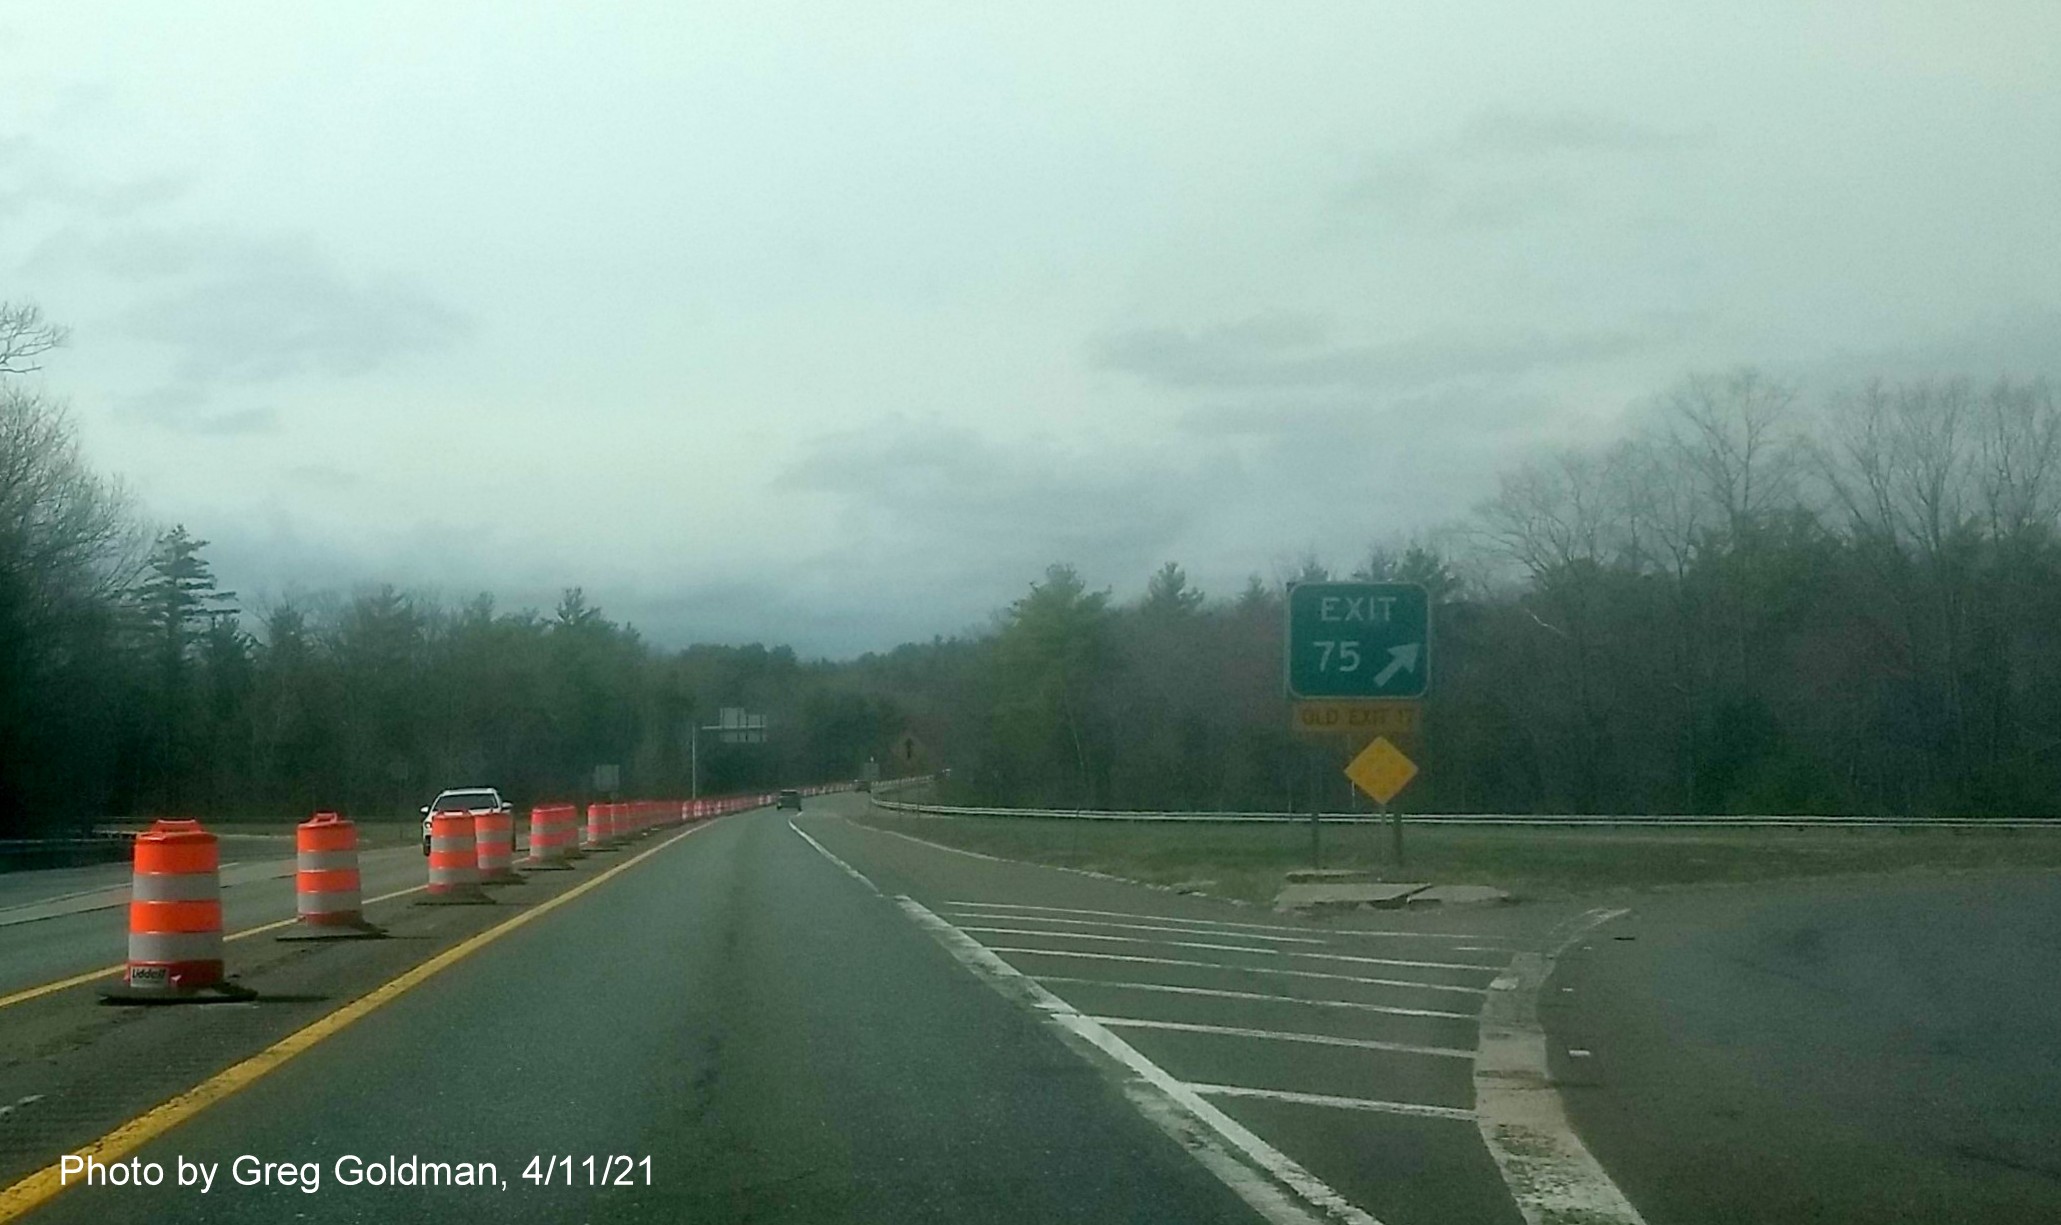 Image of gore sign for MA 32 exit with new milepost based exit number with yellow Old Exit 17 advisory sign attached below on MA 2 West in Athol, by Greg Goldman, April 2021